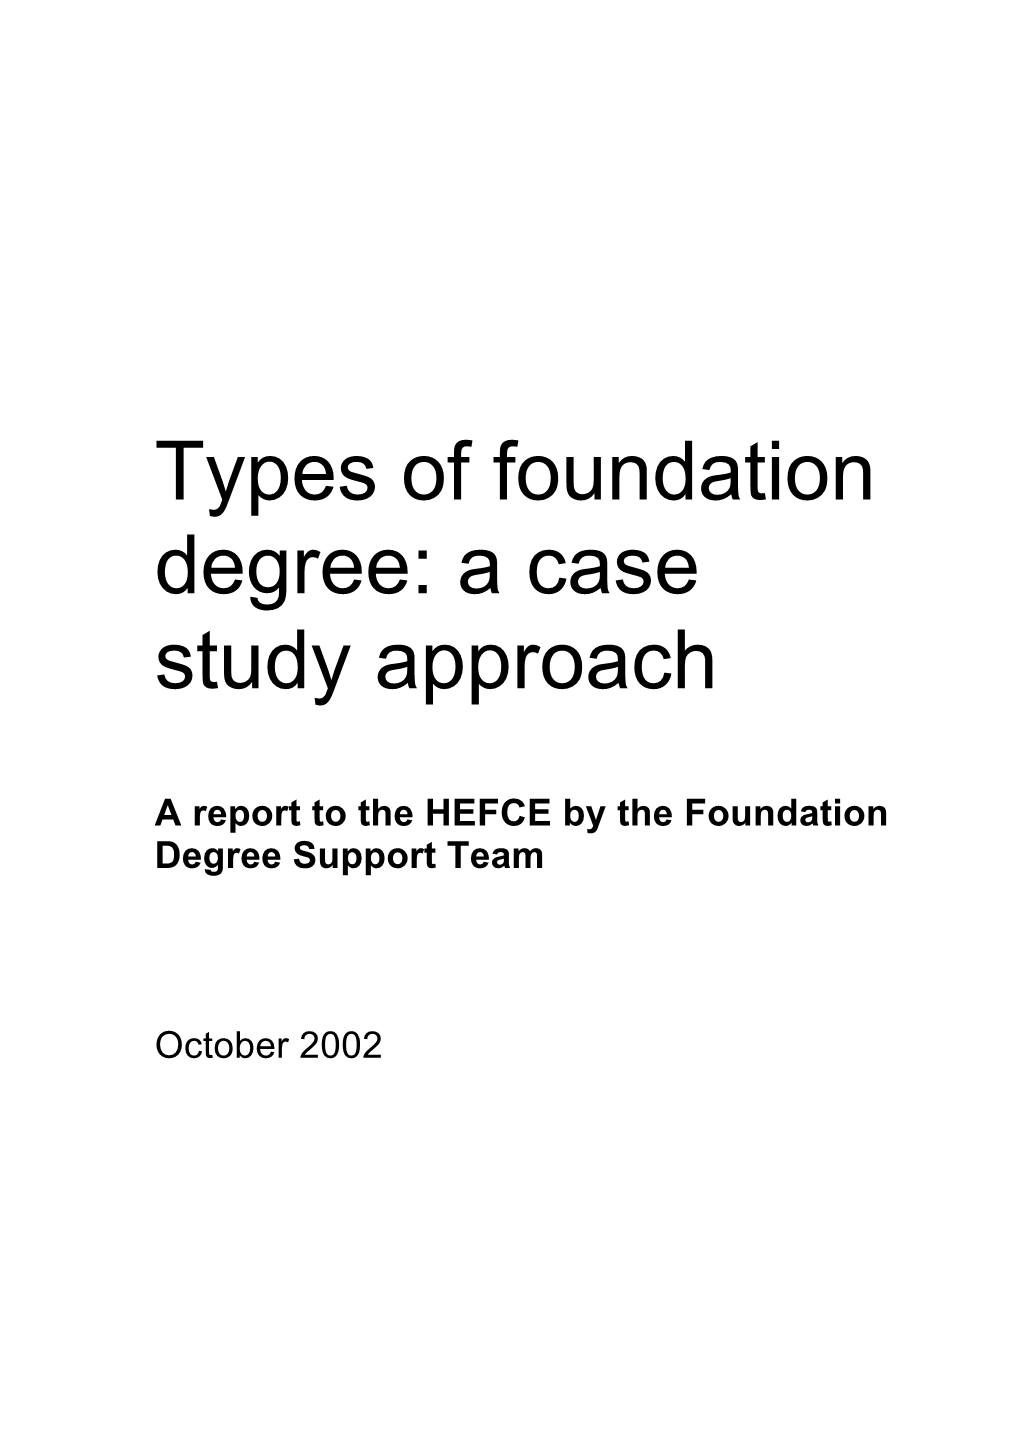 Types of Foundation Degree: a Case Study Approach